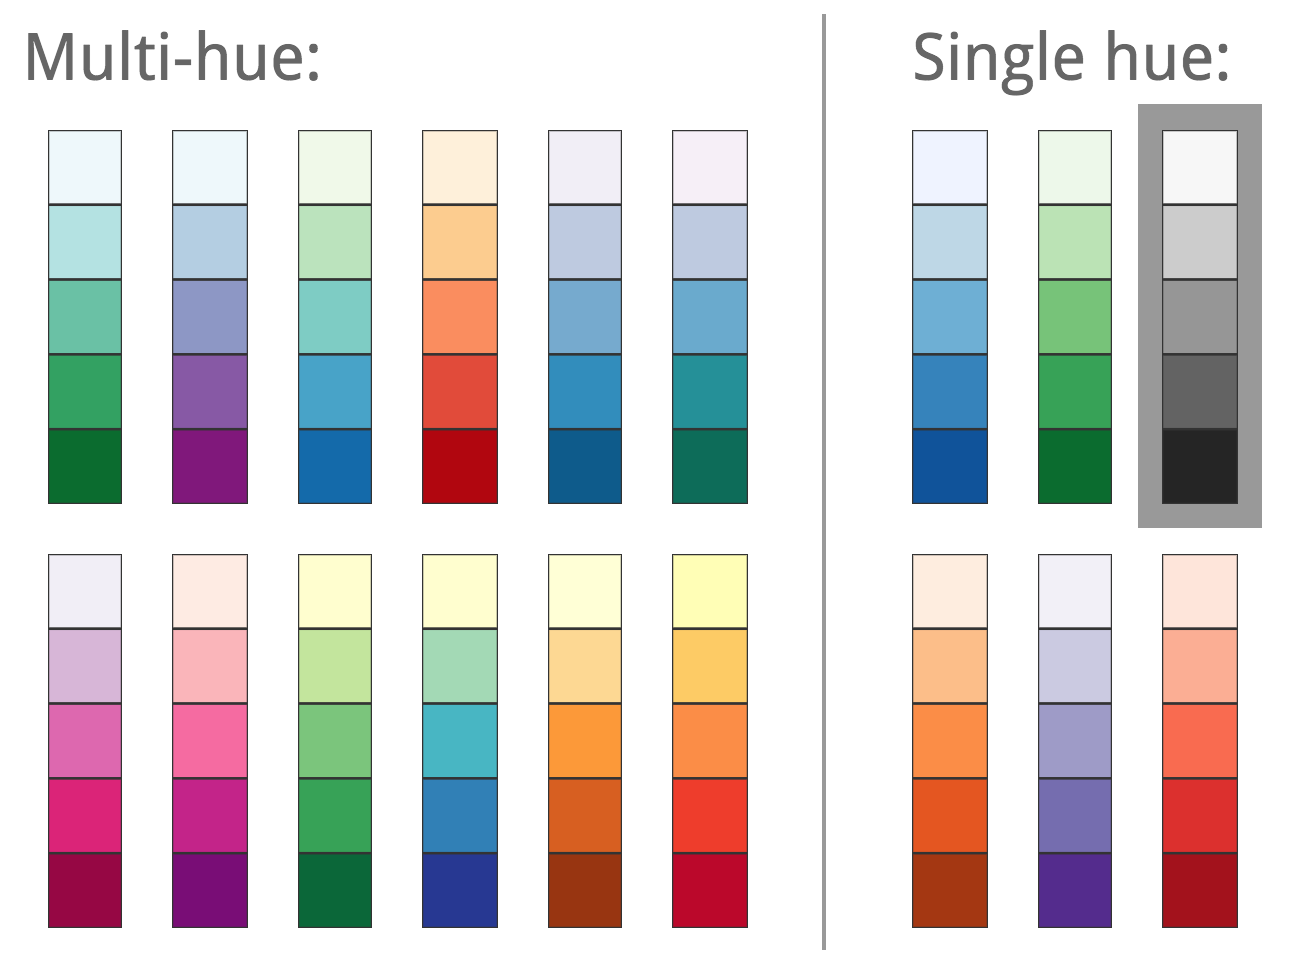 Selection of ColourBrewer palettes